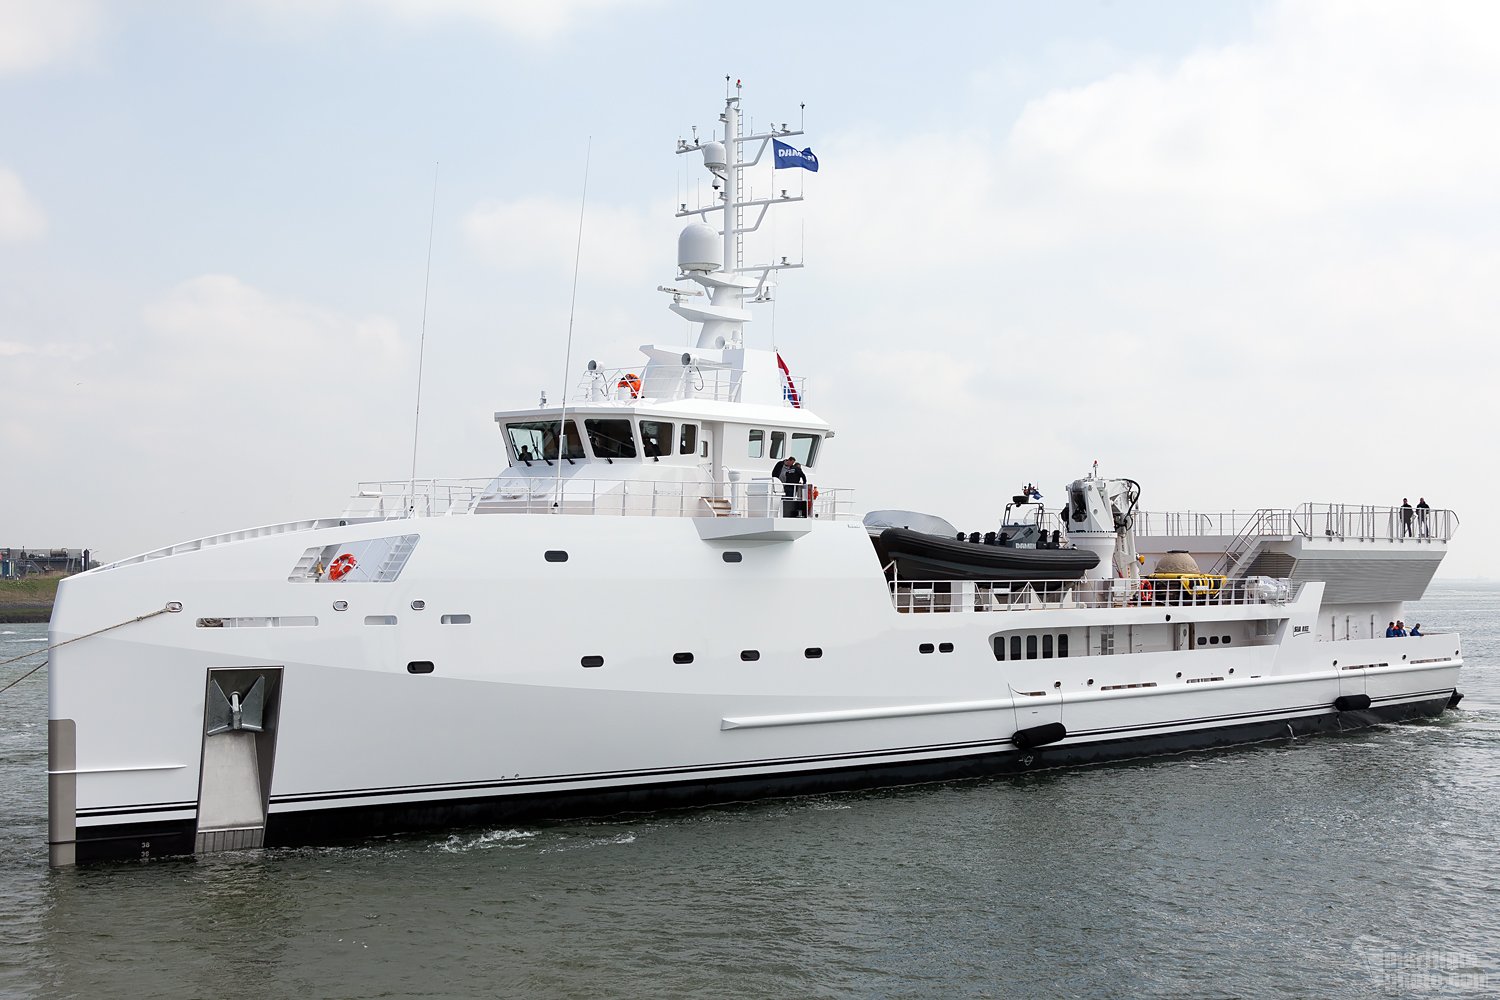 yacht support vessel game changer